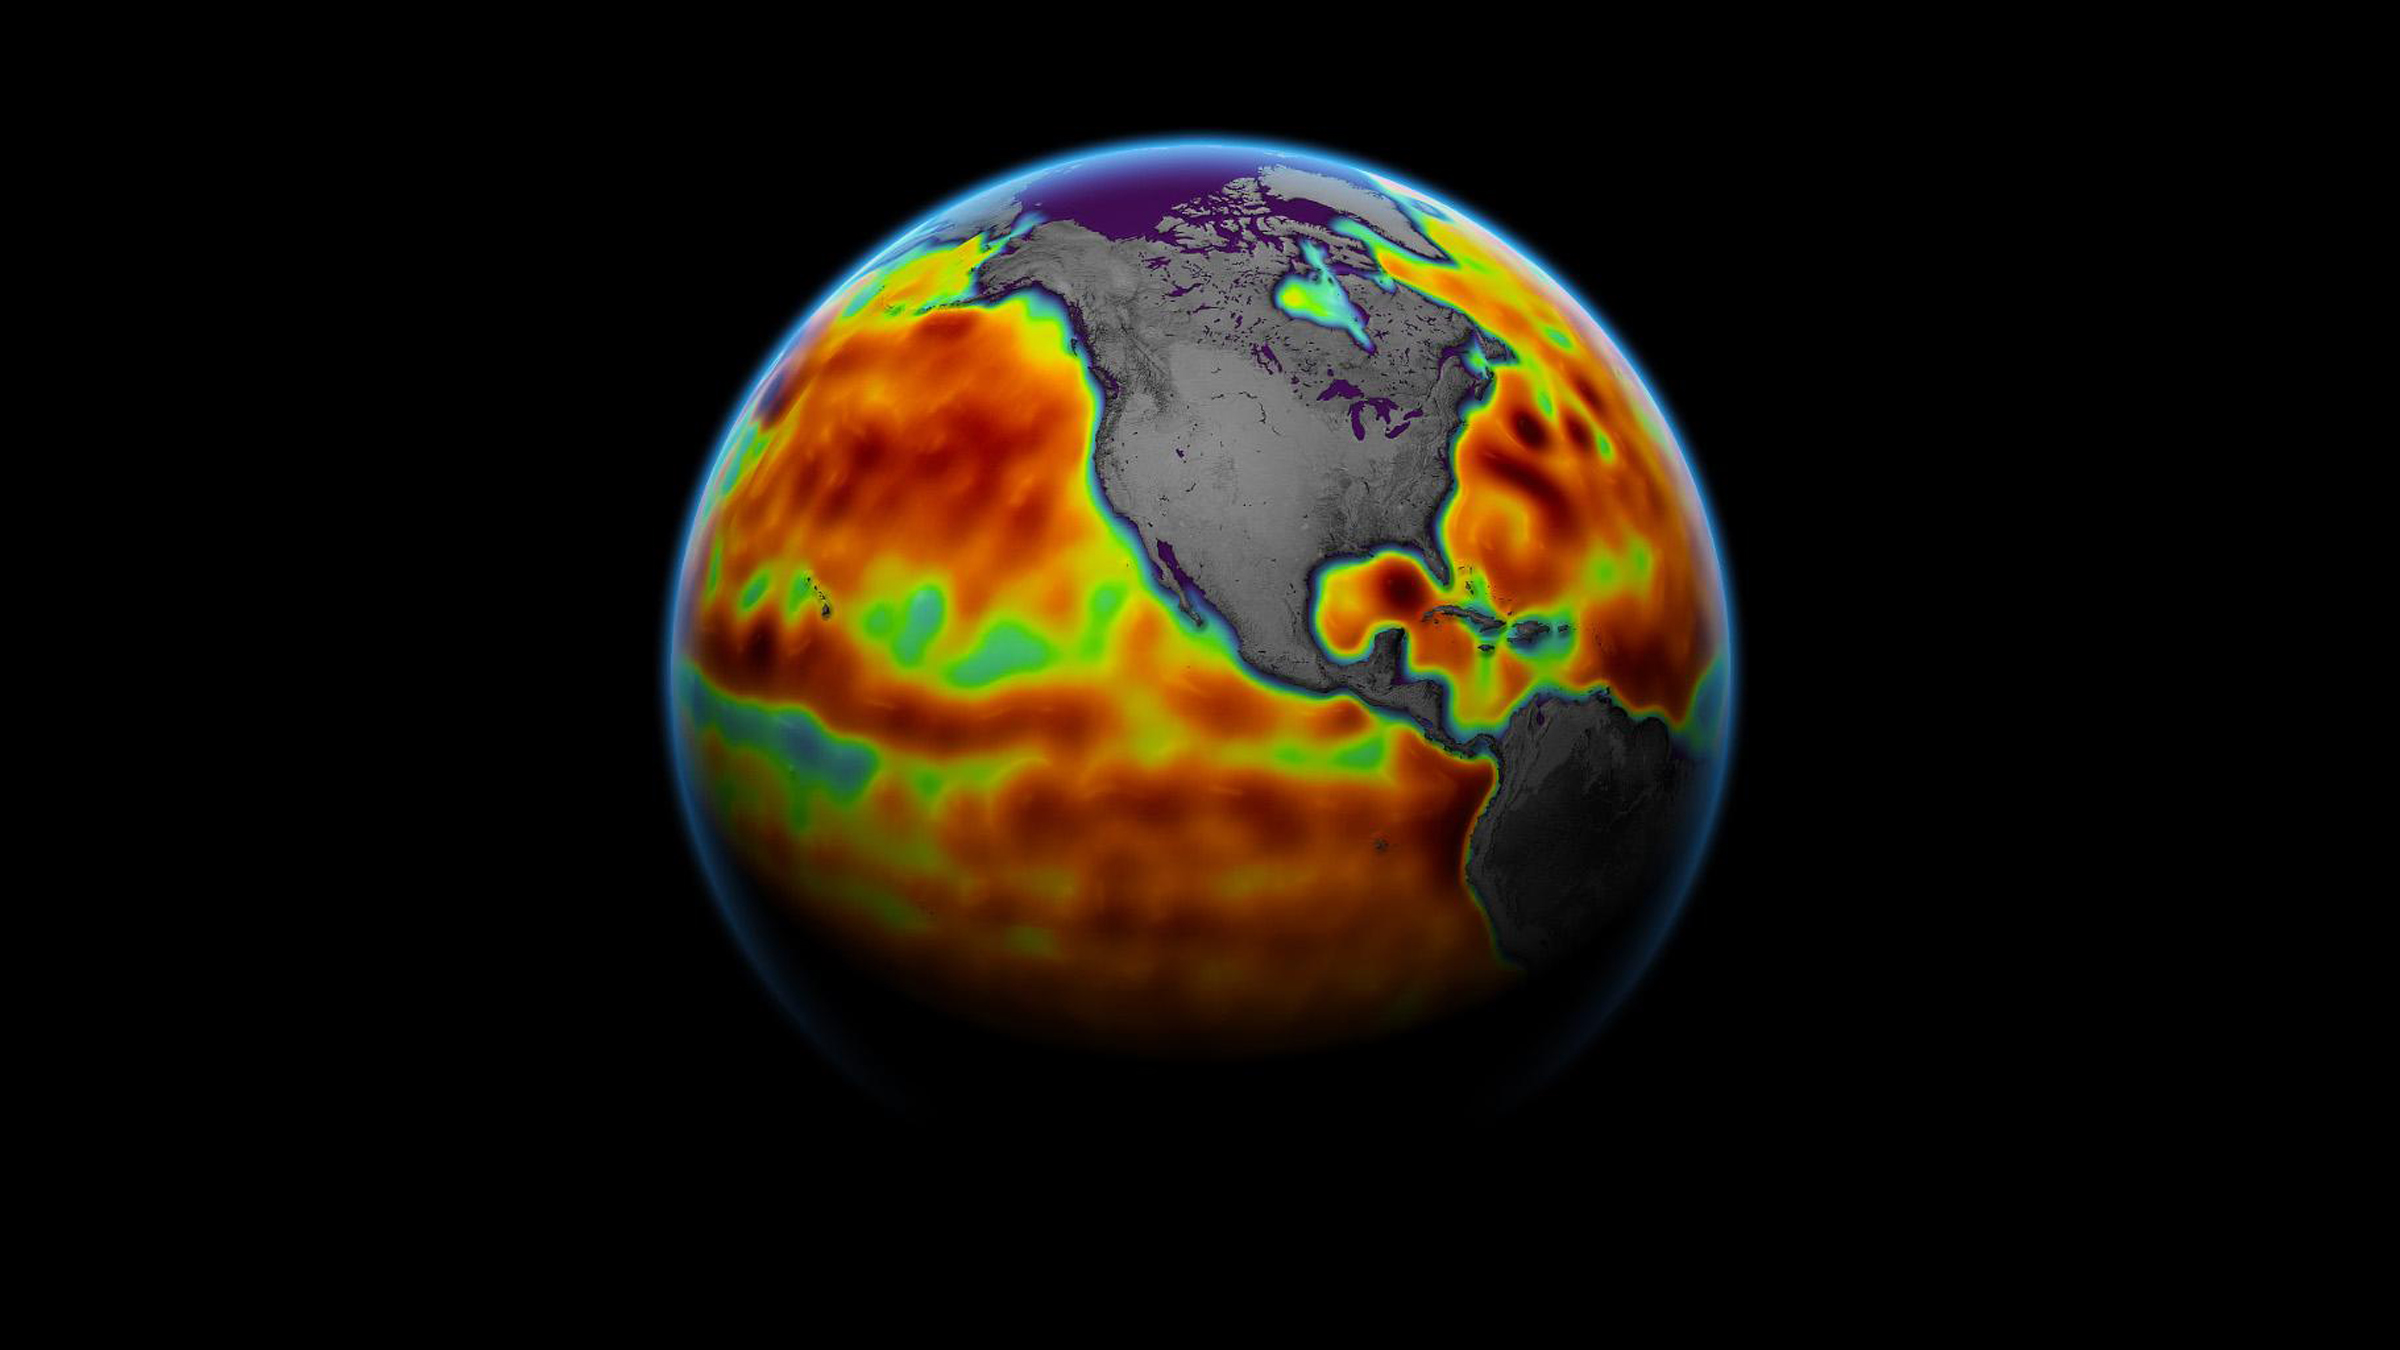 In this map of Earth in 2021, we see sea level as measured by Michael Freilich's Sentinel-6 satellite.  Regions in red have above-normal sea levels, while blue zones have below-normal sea levels.